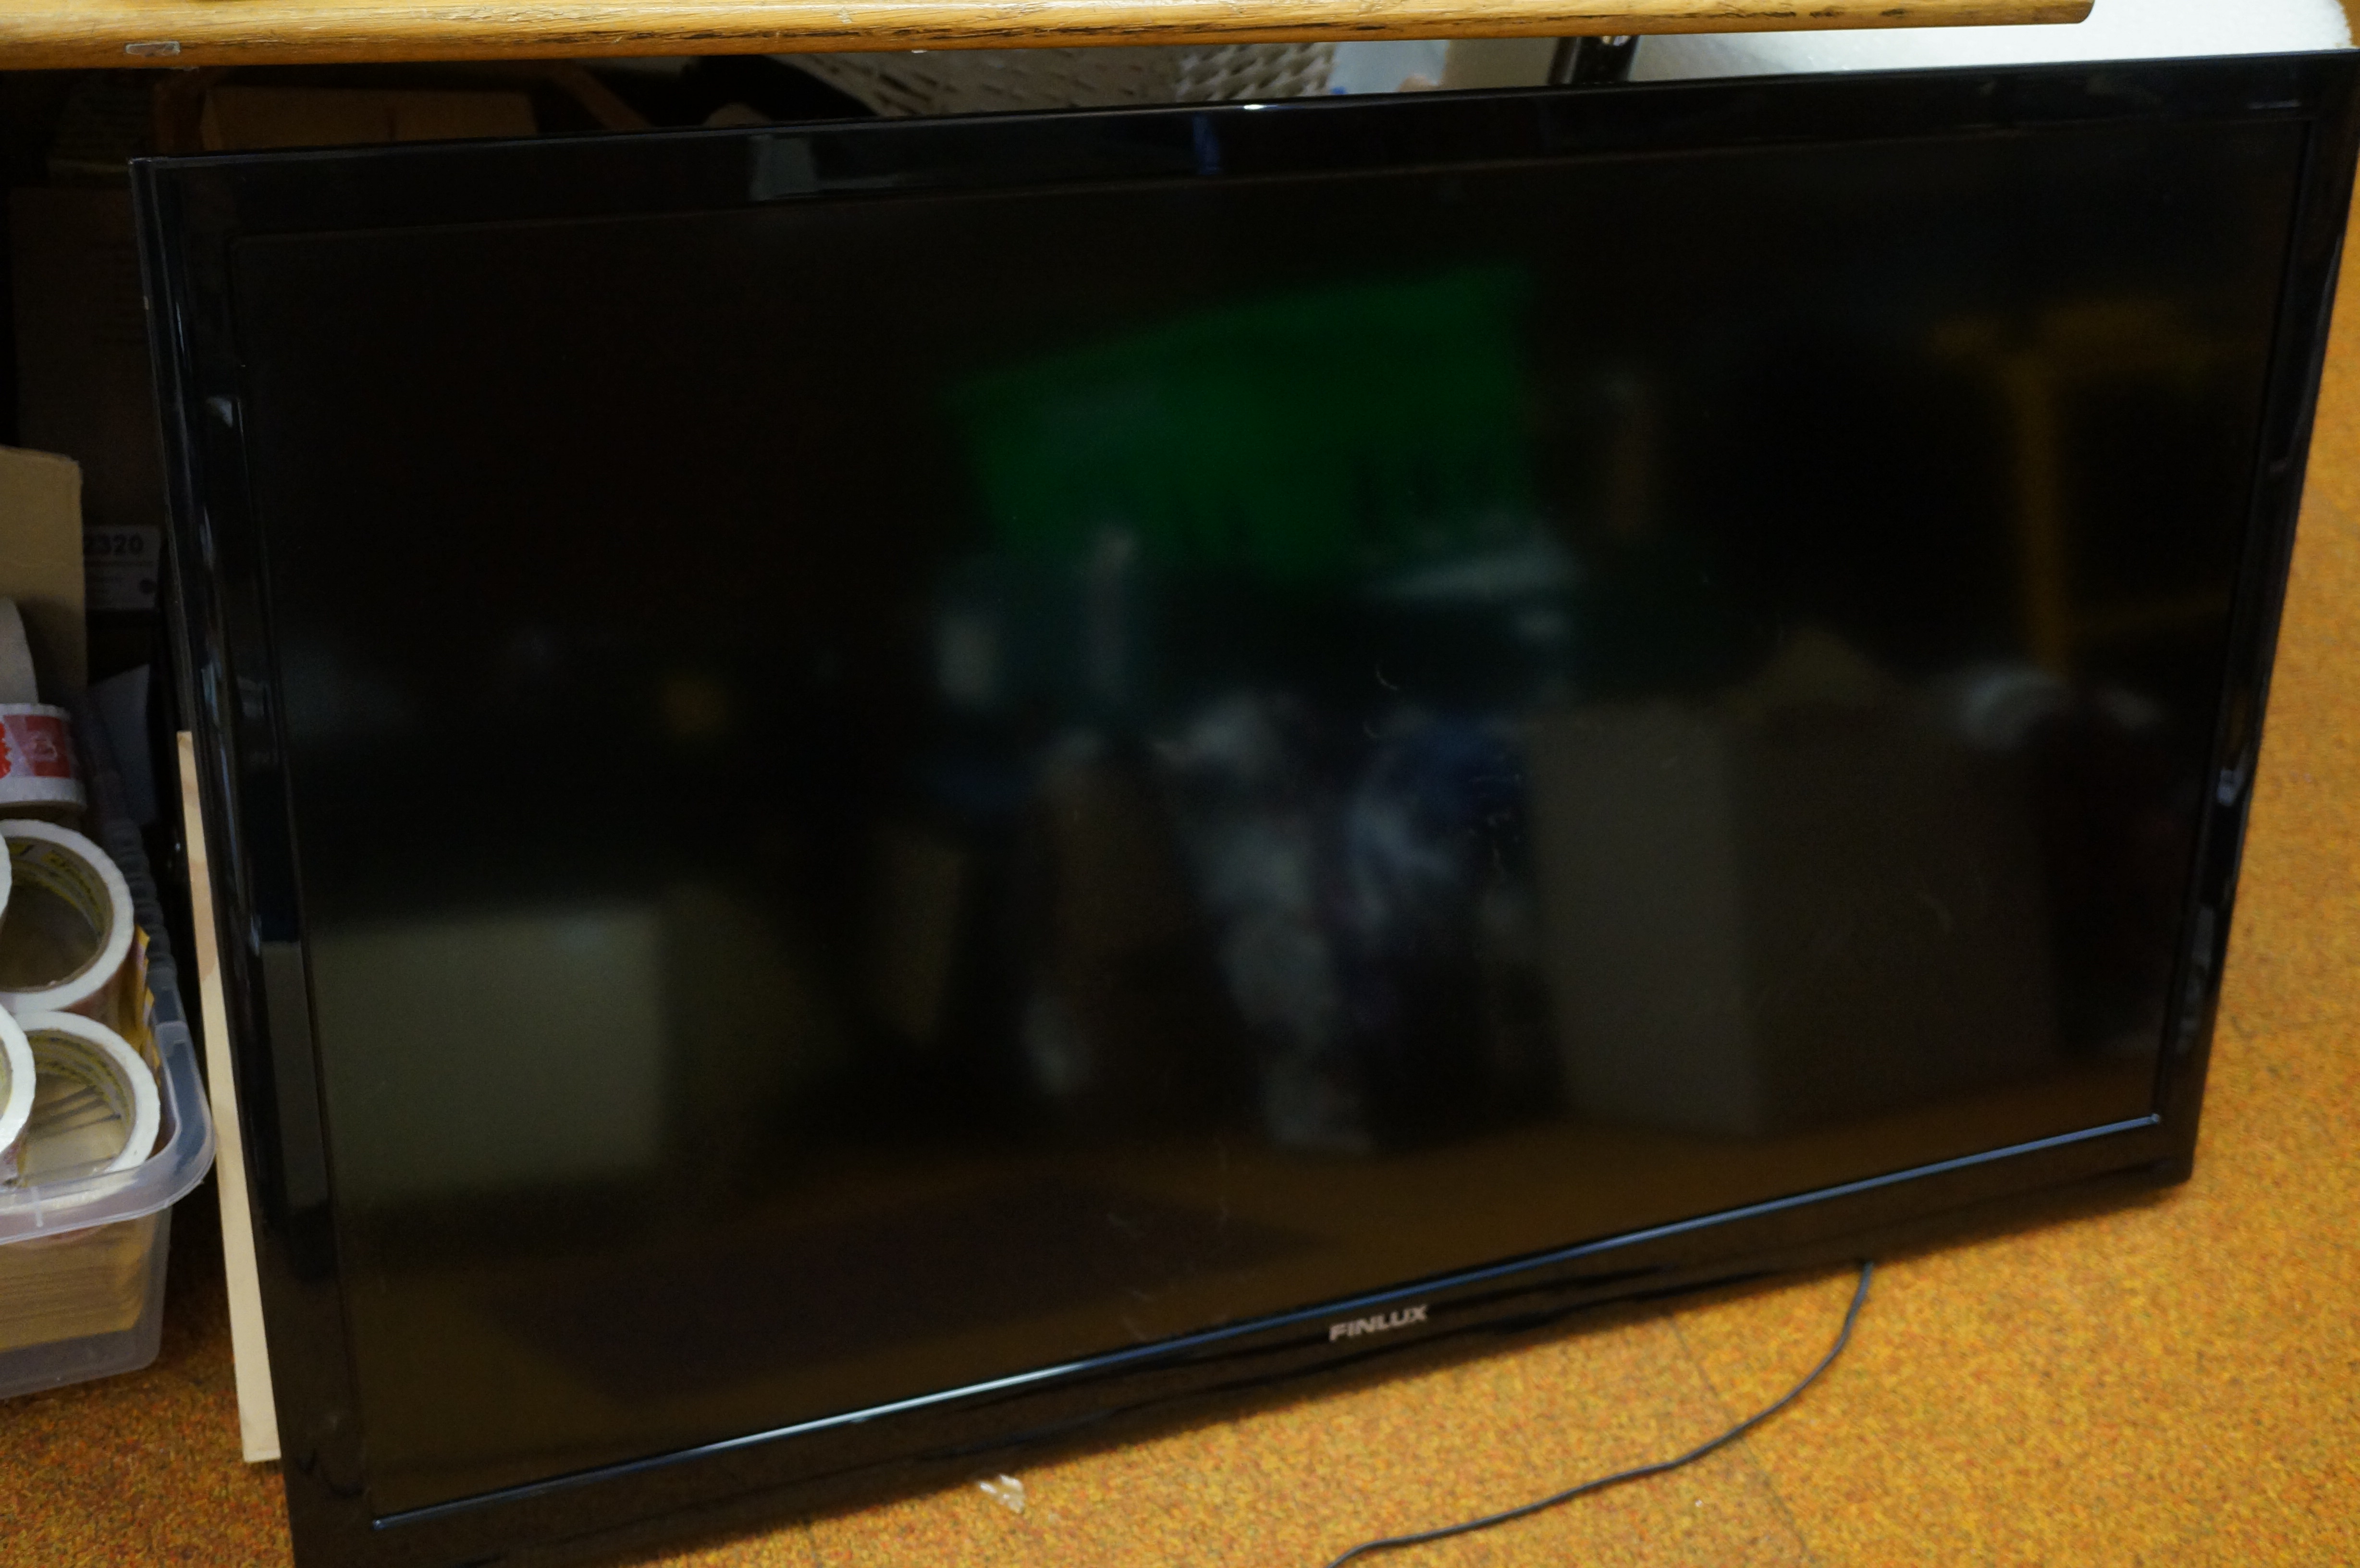 Finlux 48'' flat screen TV with remote control